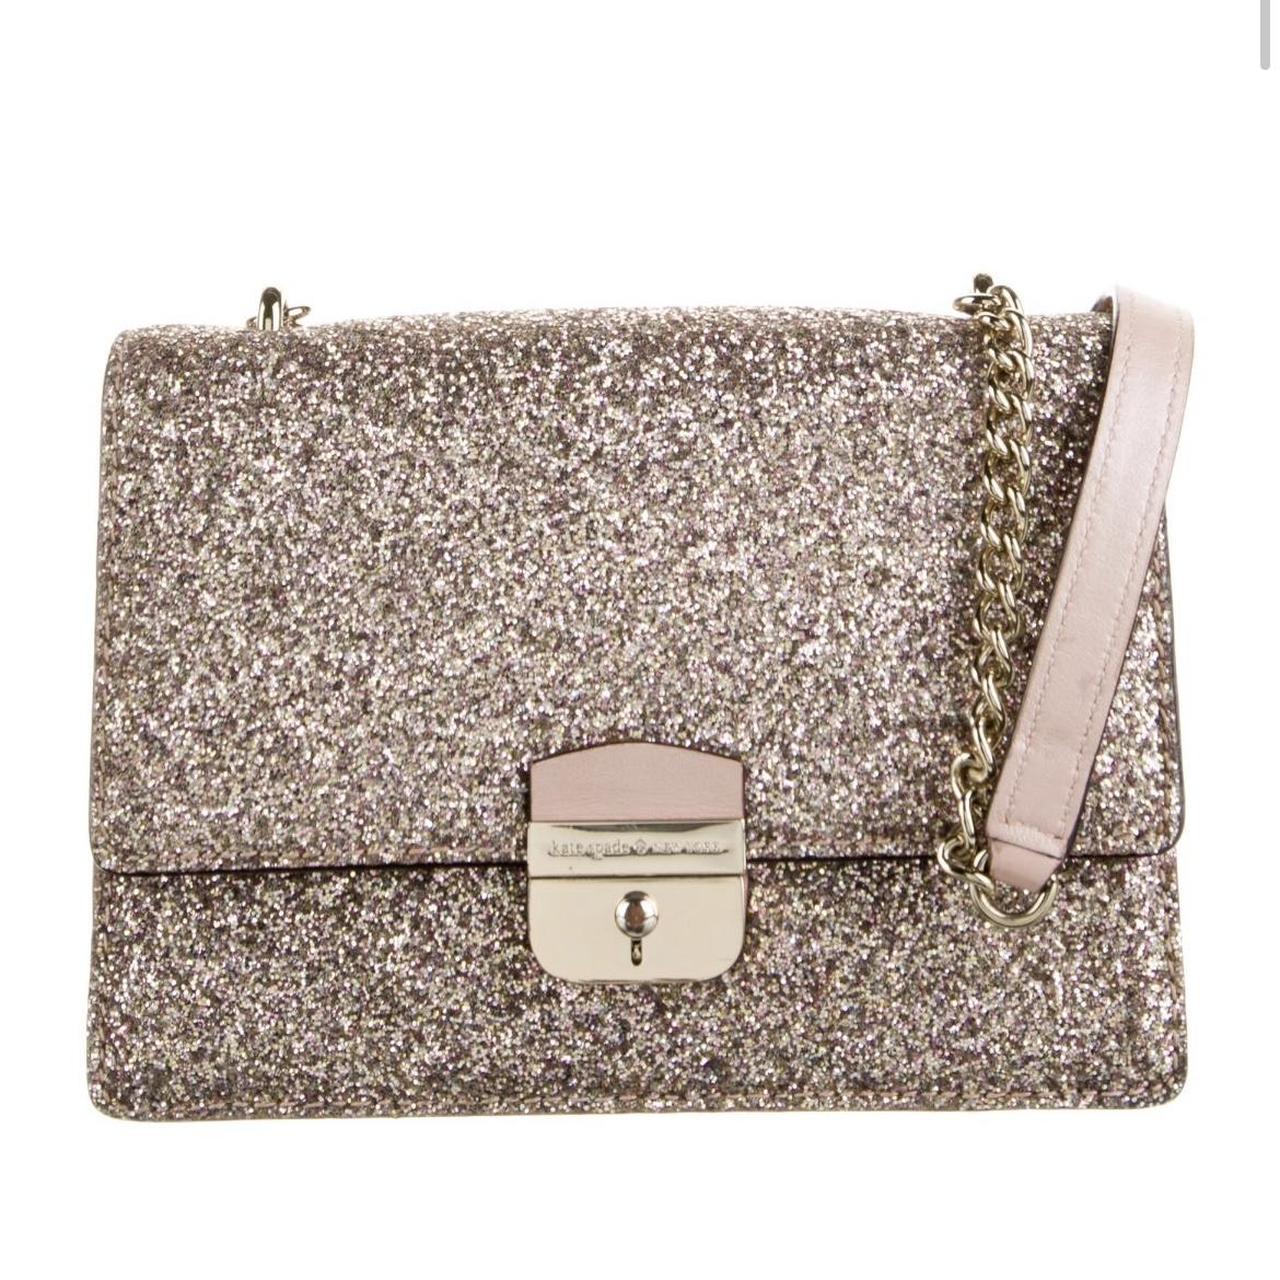 Kate Spade New York  Women's Pink and Silver Bag